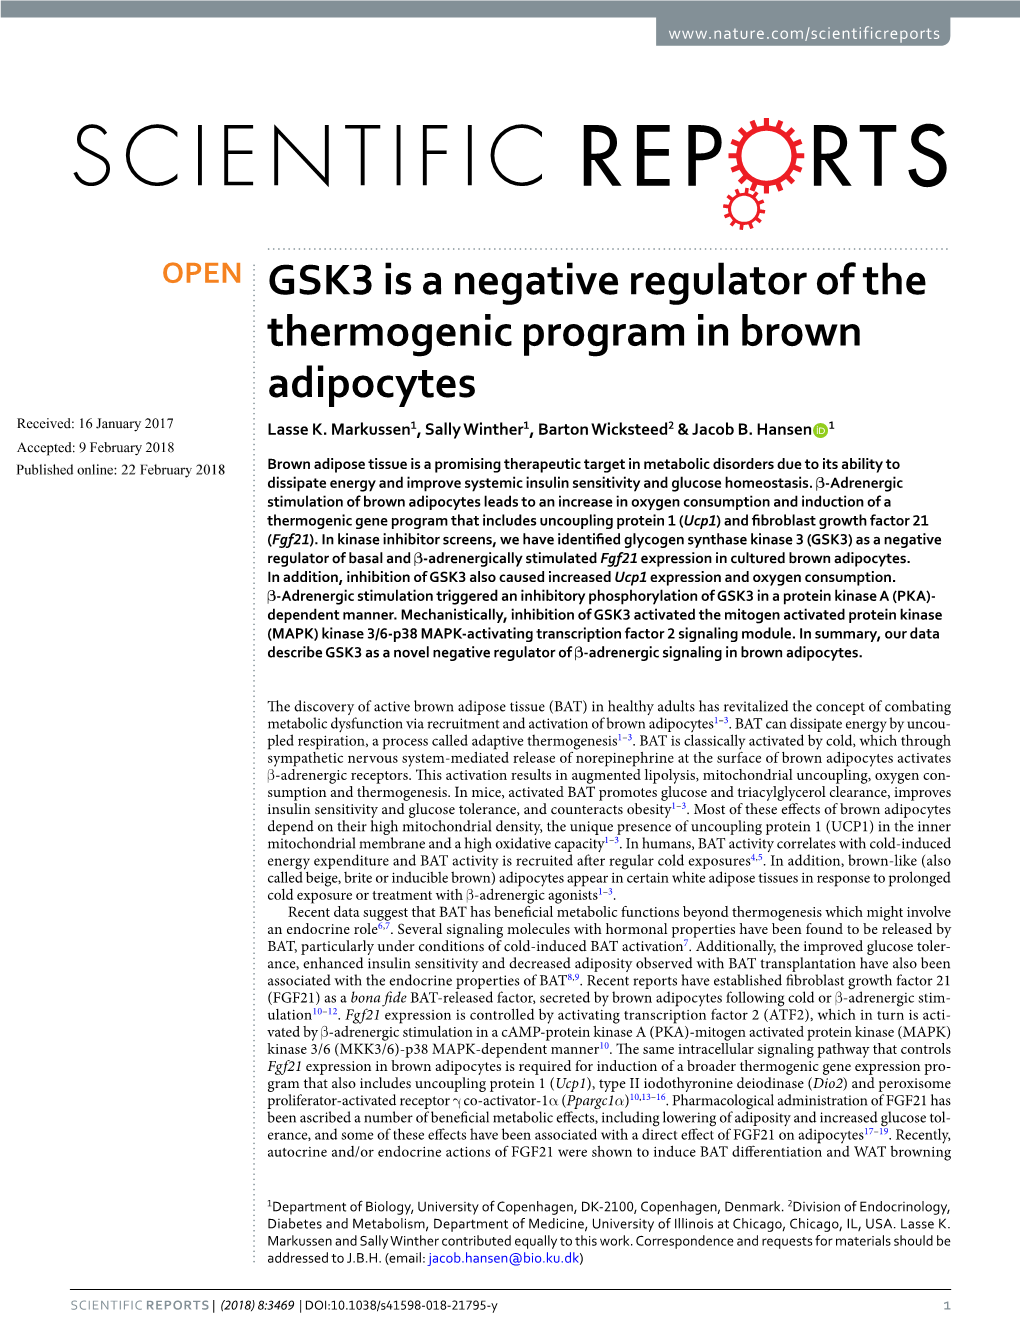 GSK3 Is a Negative Regulator of the Thermogenic Program in Brown Adipocytes Received: 16 January 2017 Lasse K